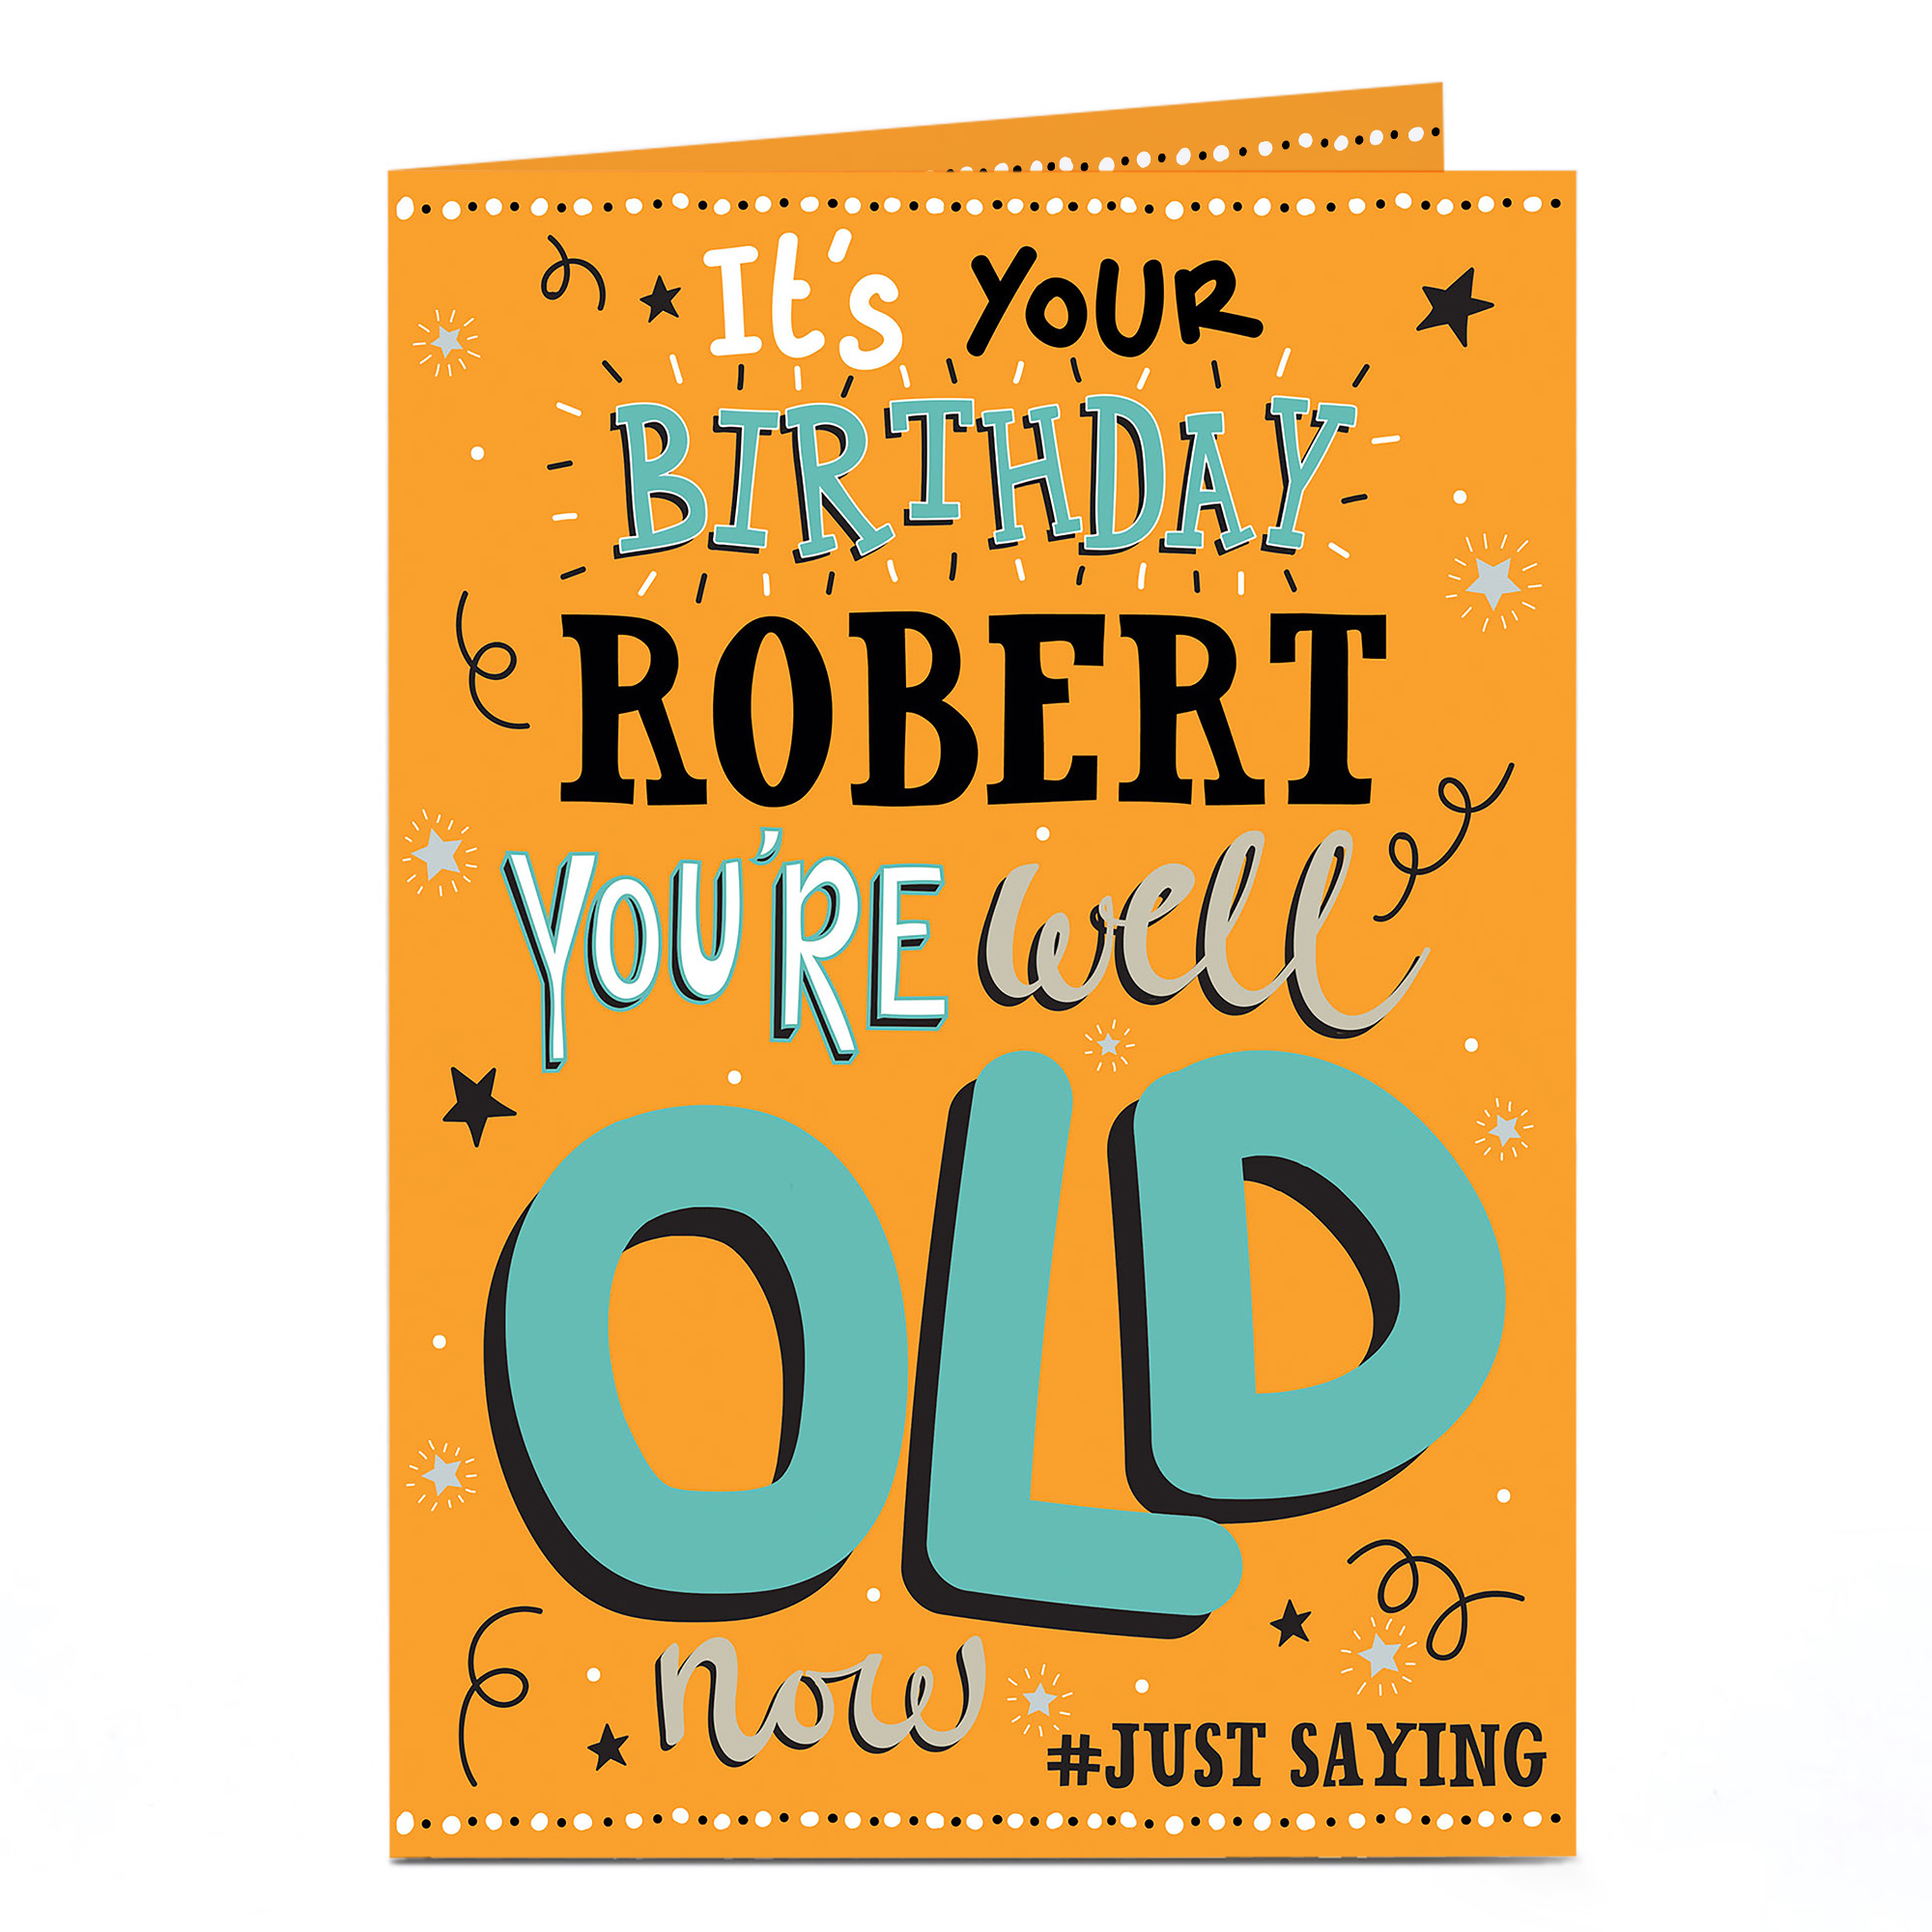 Buy Personalised Birthday Card - You're Well Old for GBP 1.79 | Card ...